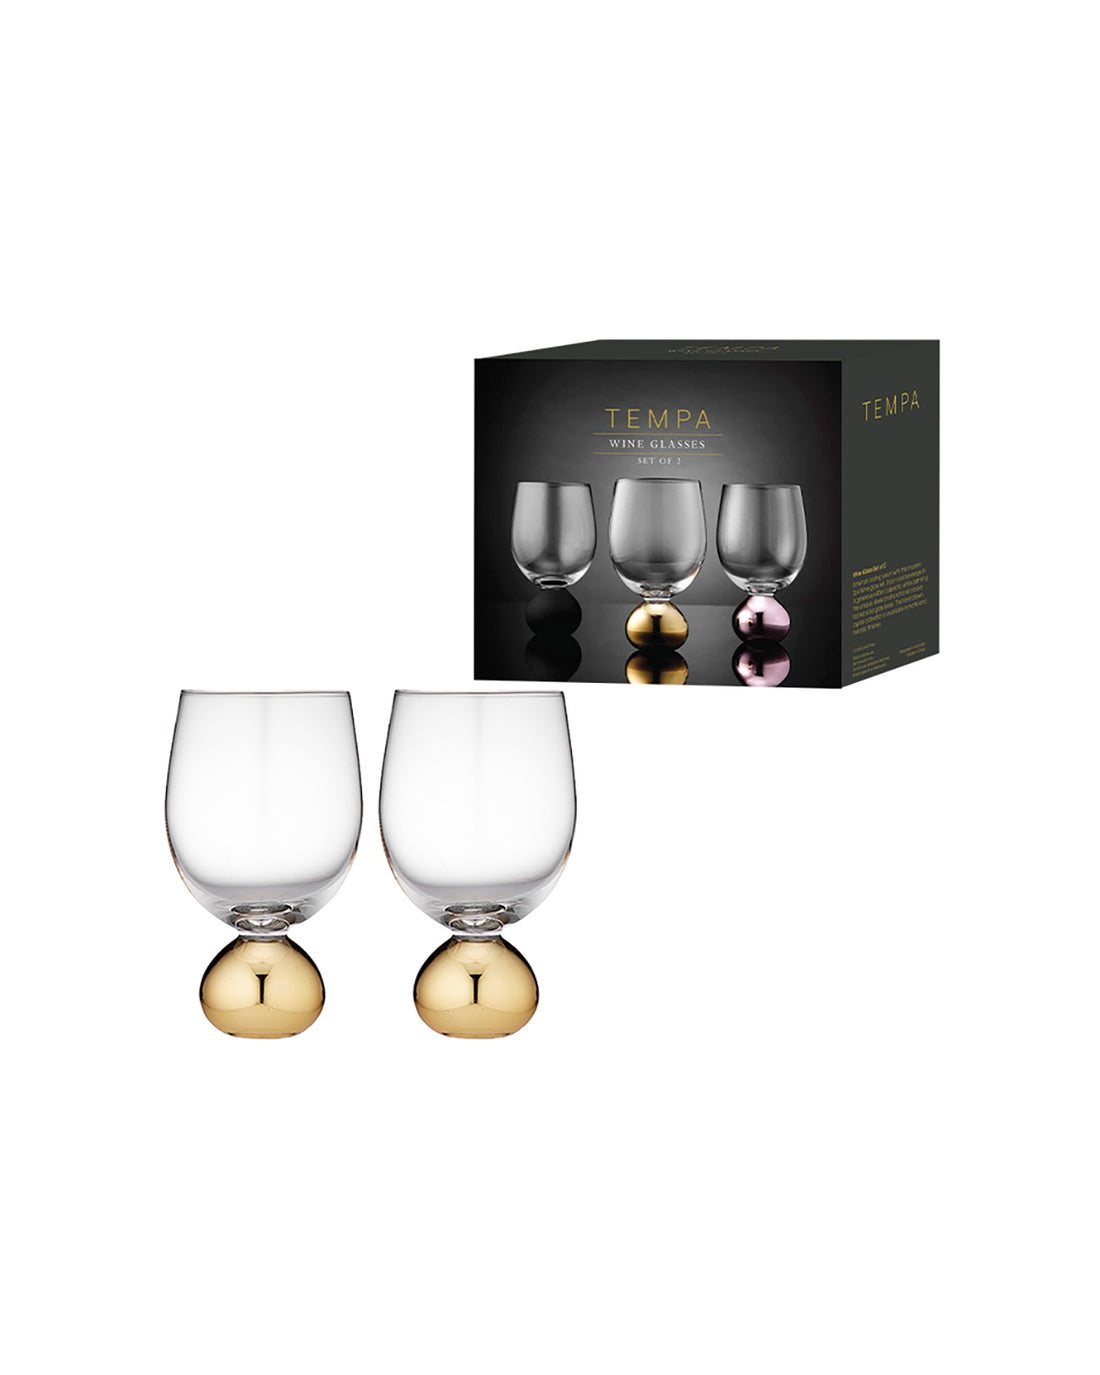 Astrid Gold Wine Glass 2 Pack